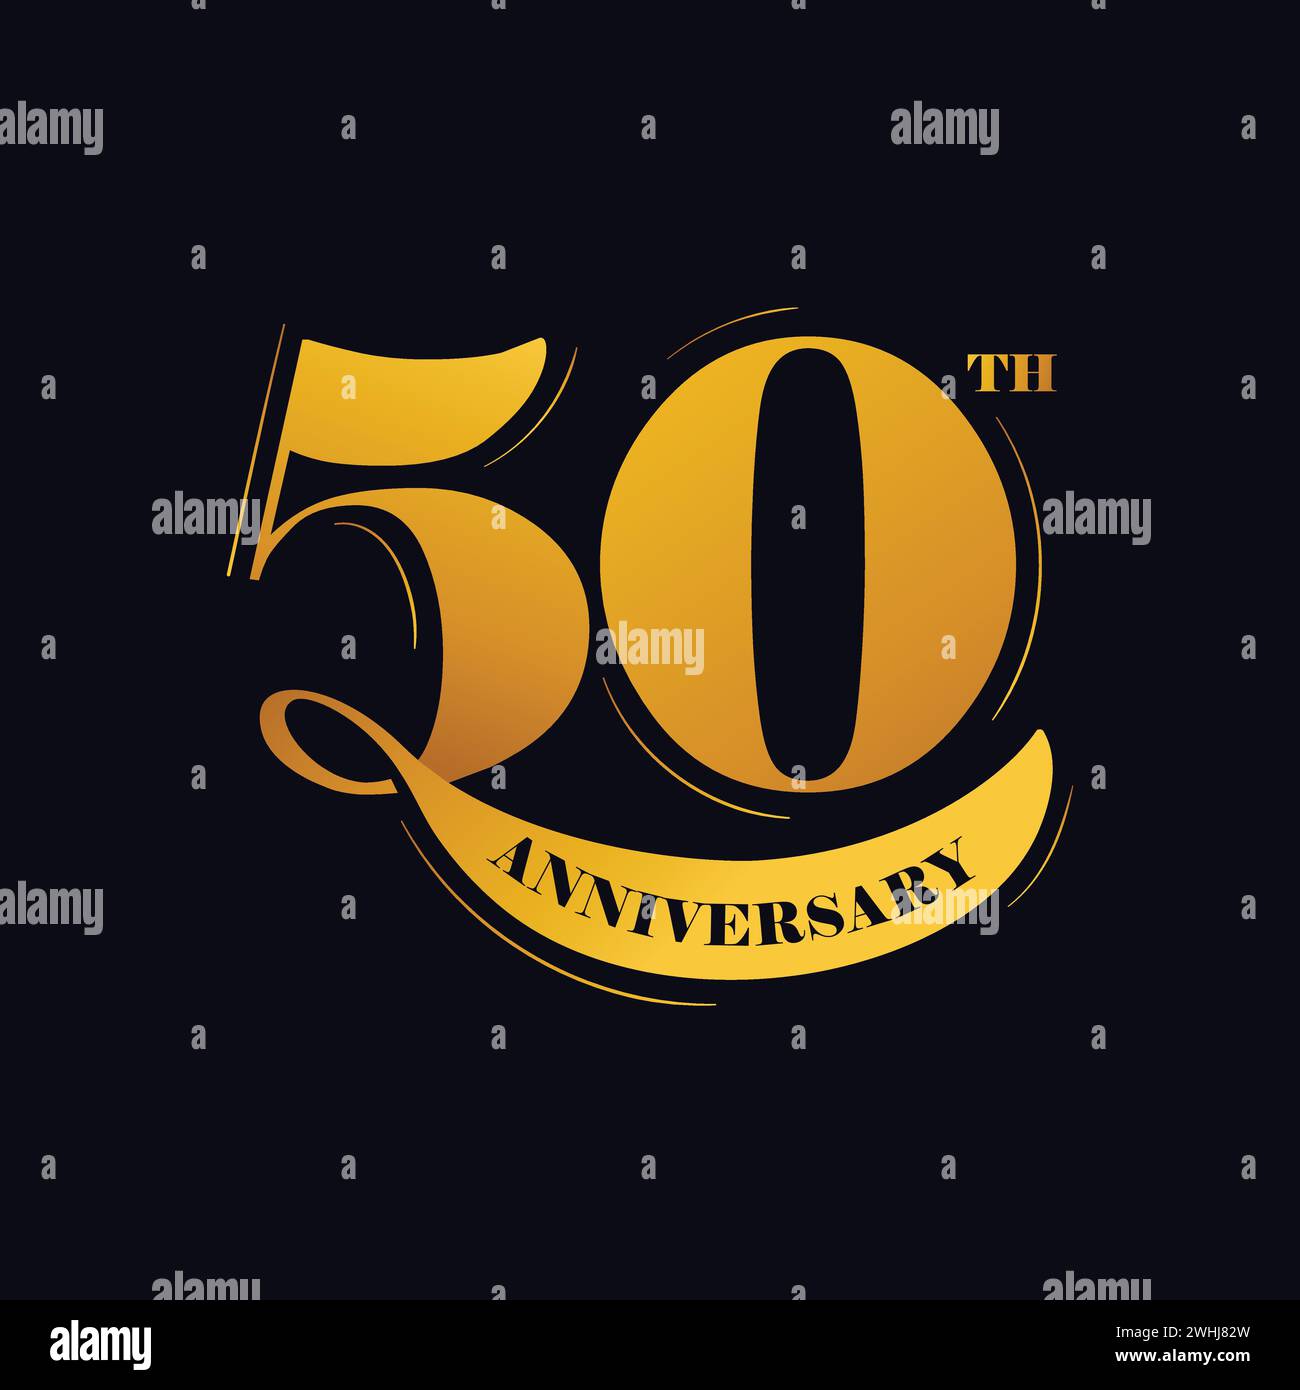 50th 50 Years Anniversary Logo Golden Stock Vector (Royalty Free